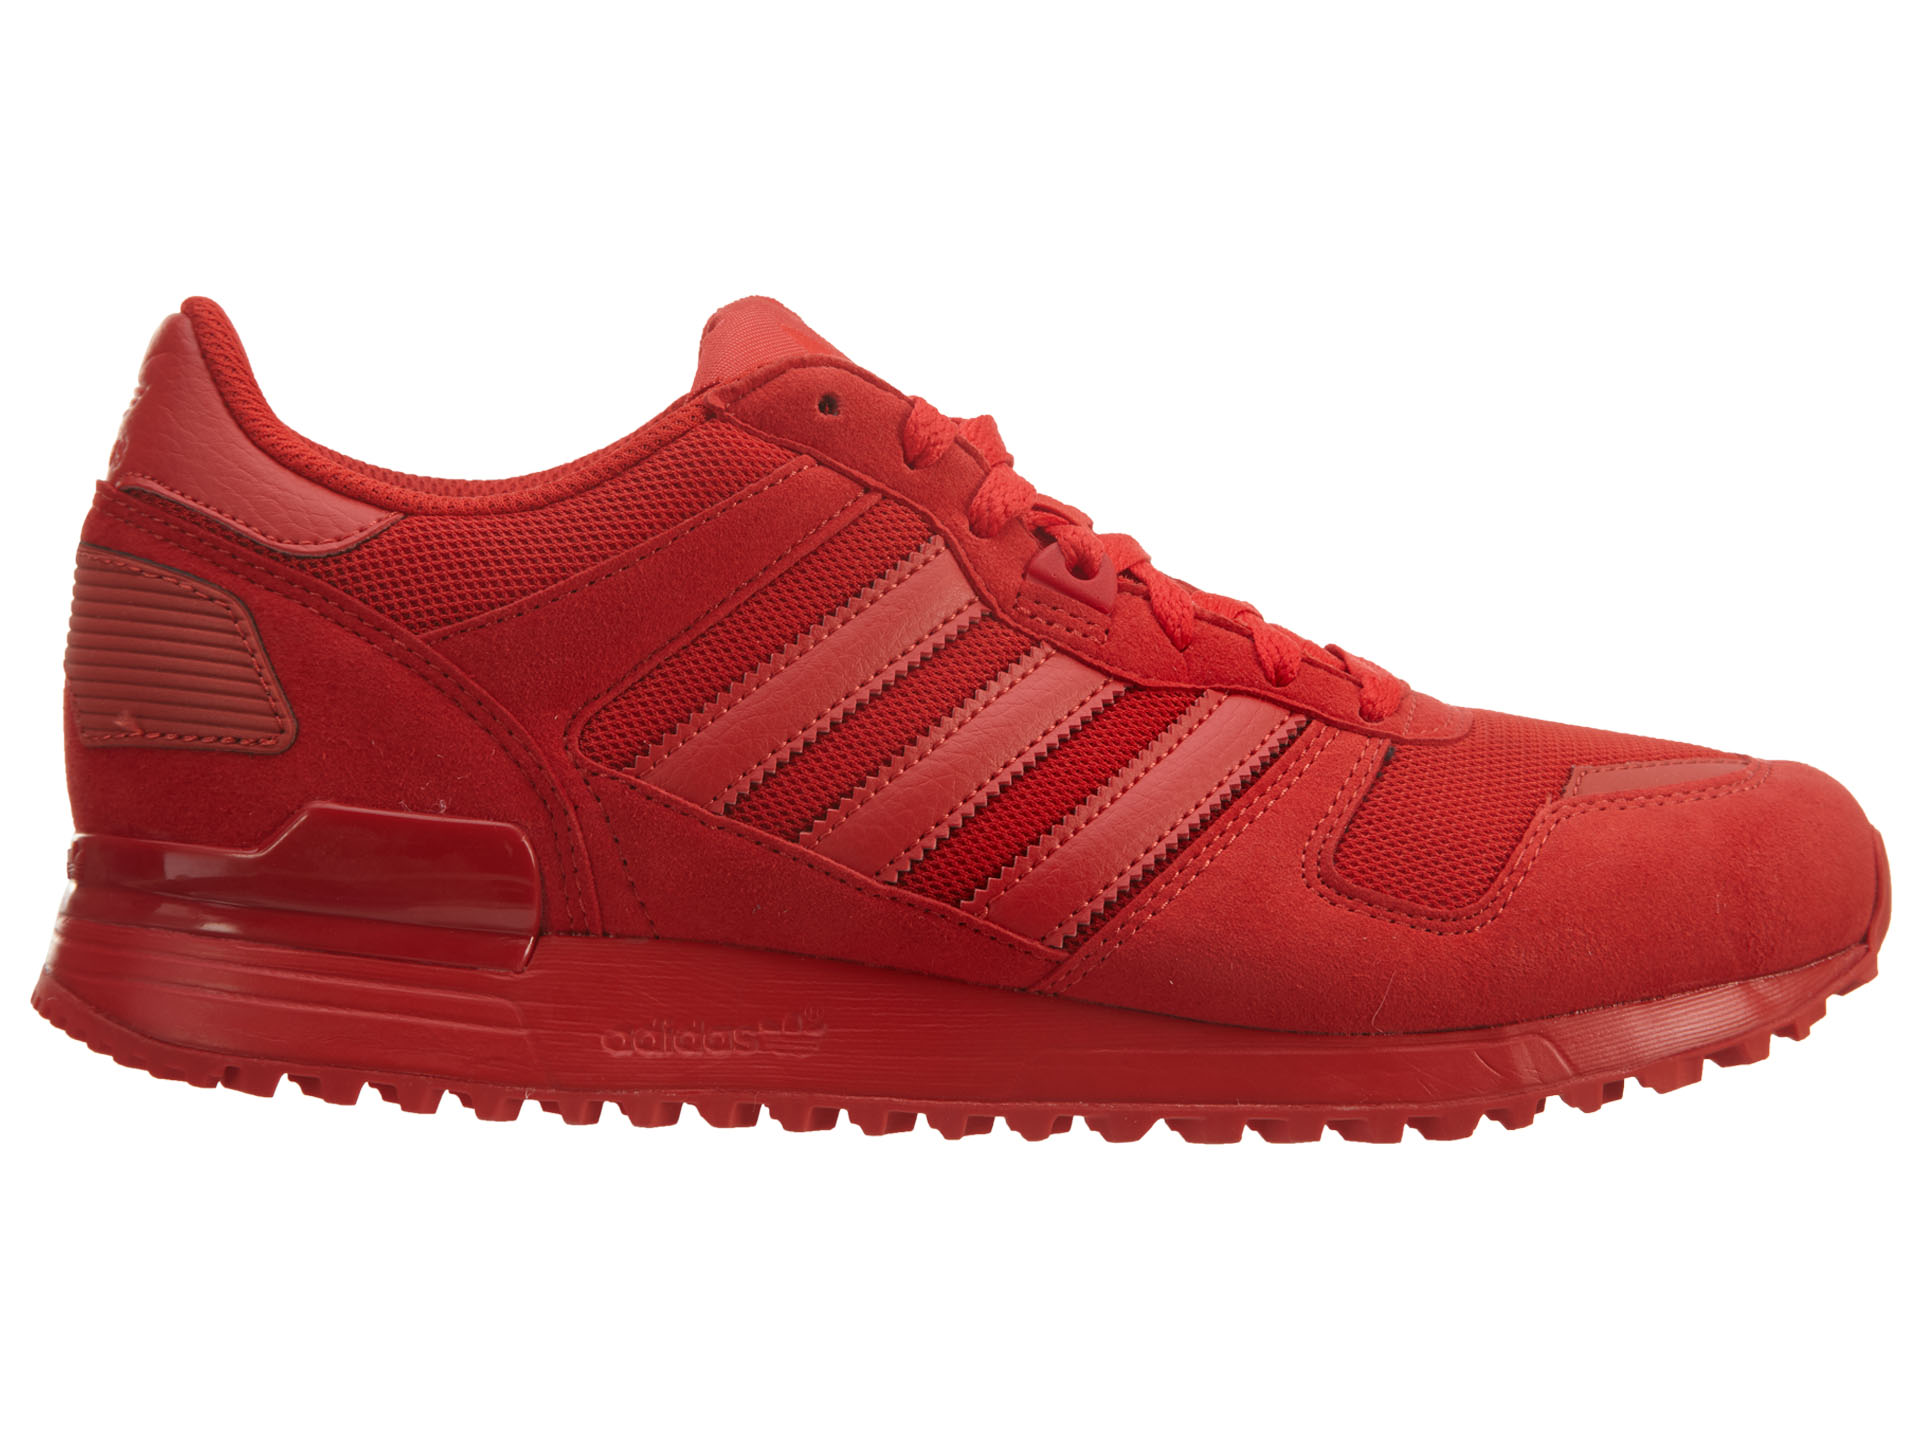 adidas Zx 700 Red/Red/Red - S79188 - US